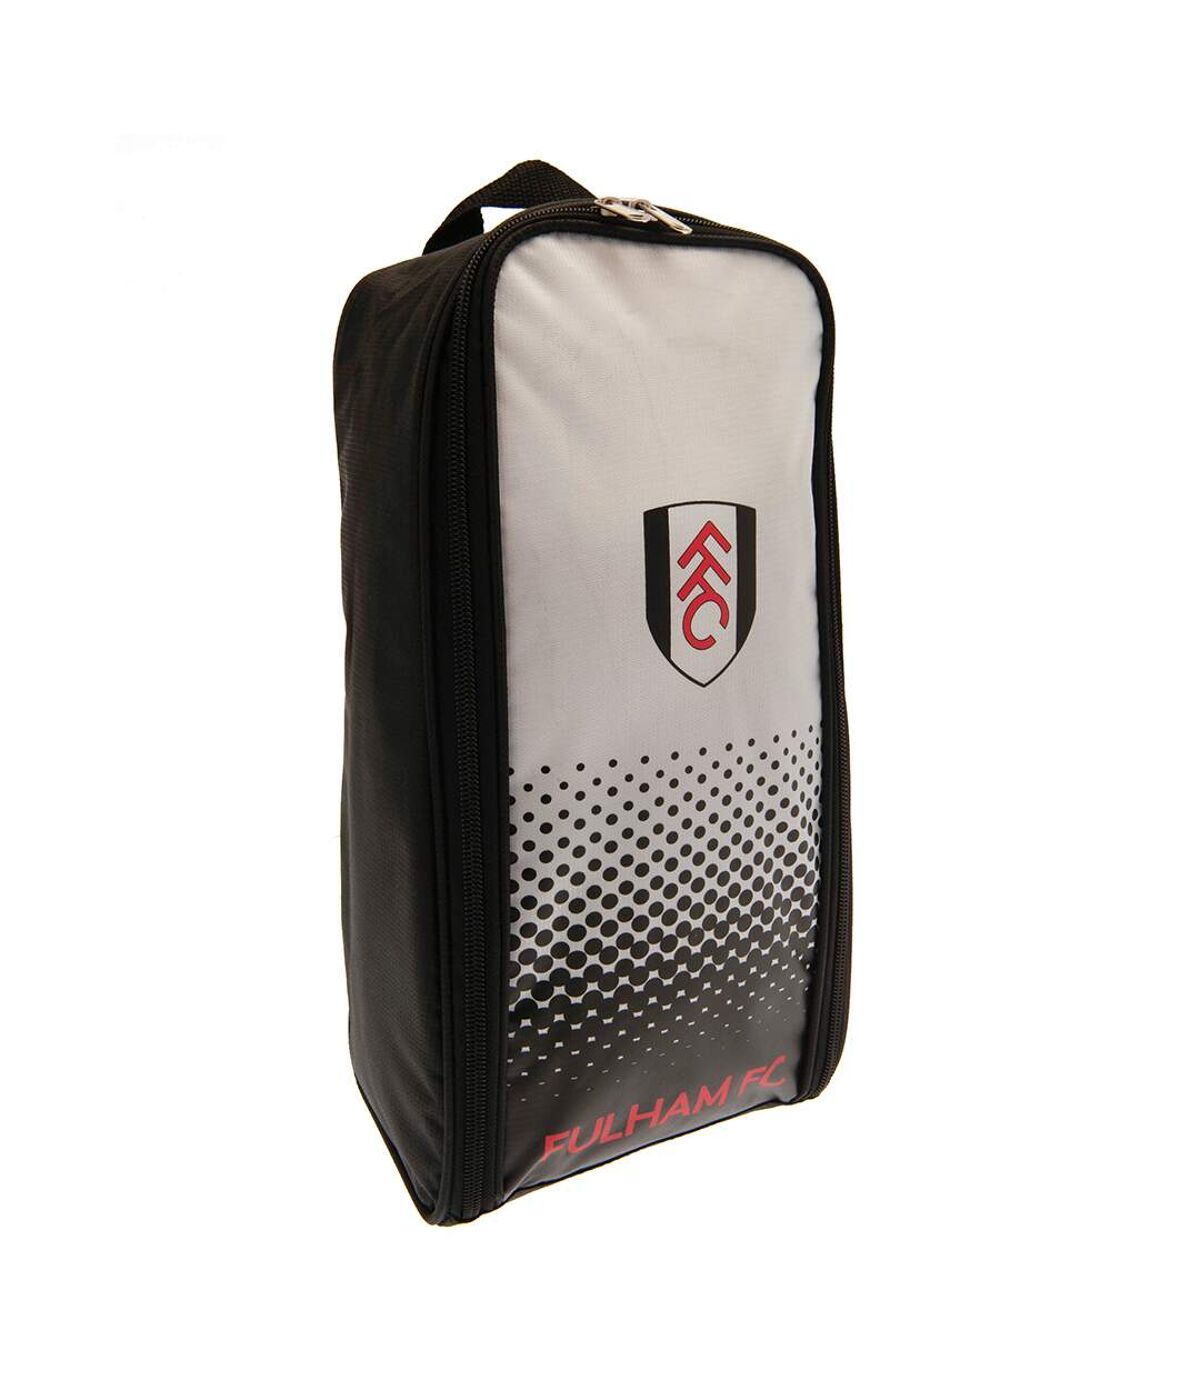 Fulham FC Fade Boot Bag (Black/Silver/Red) (One Size)